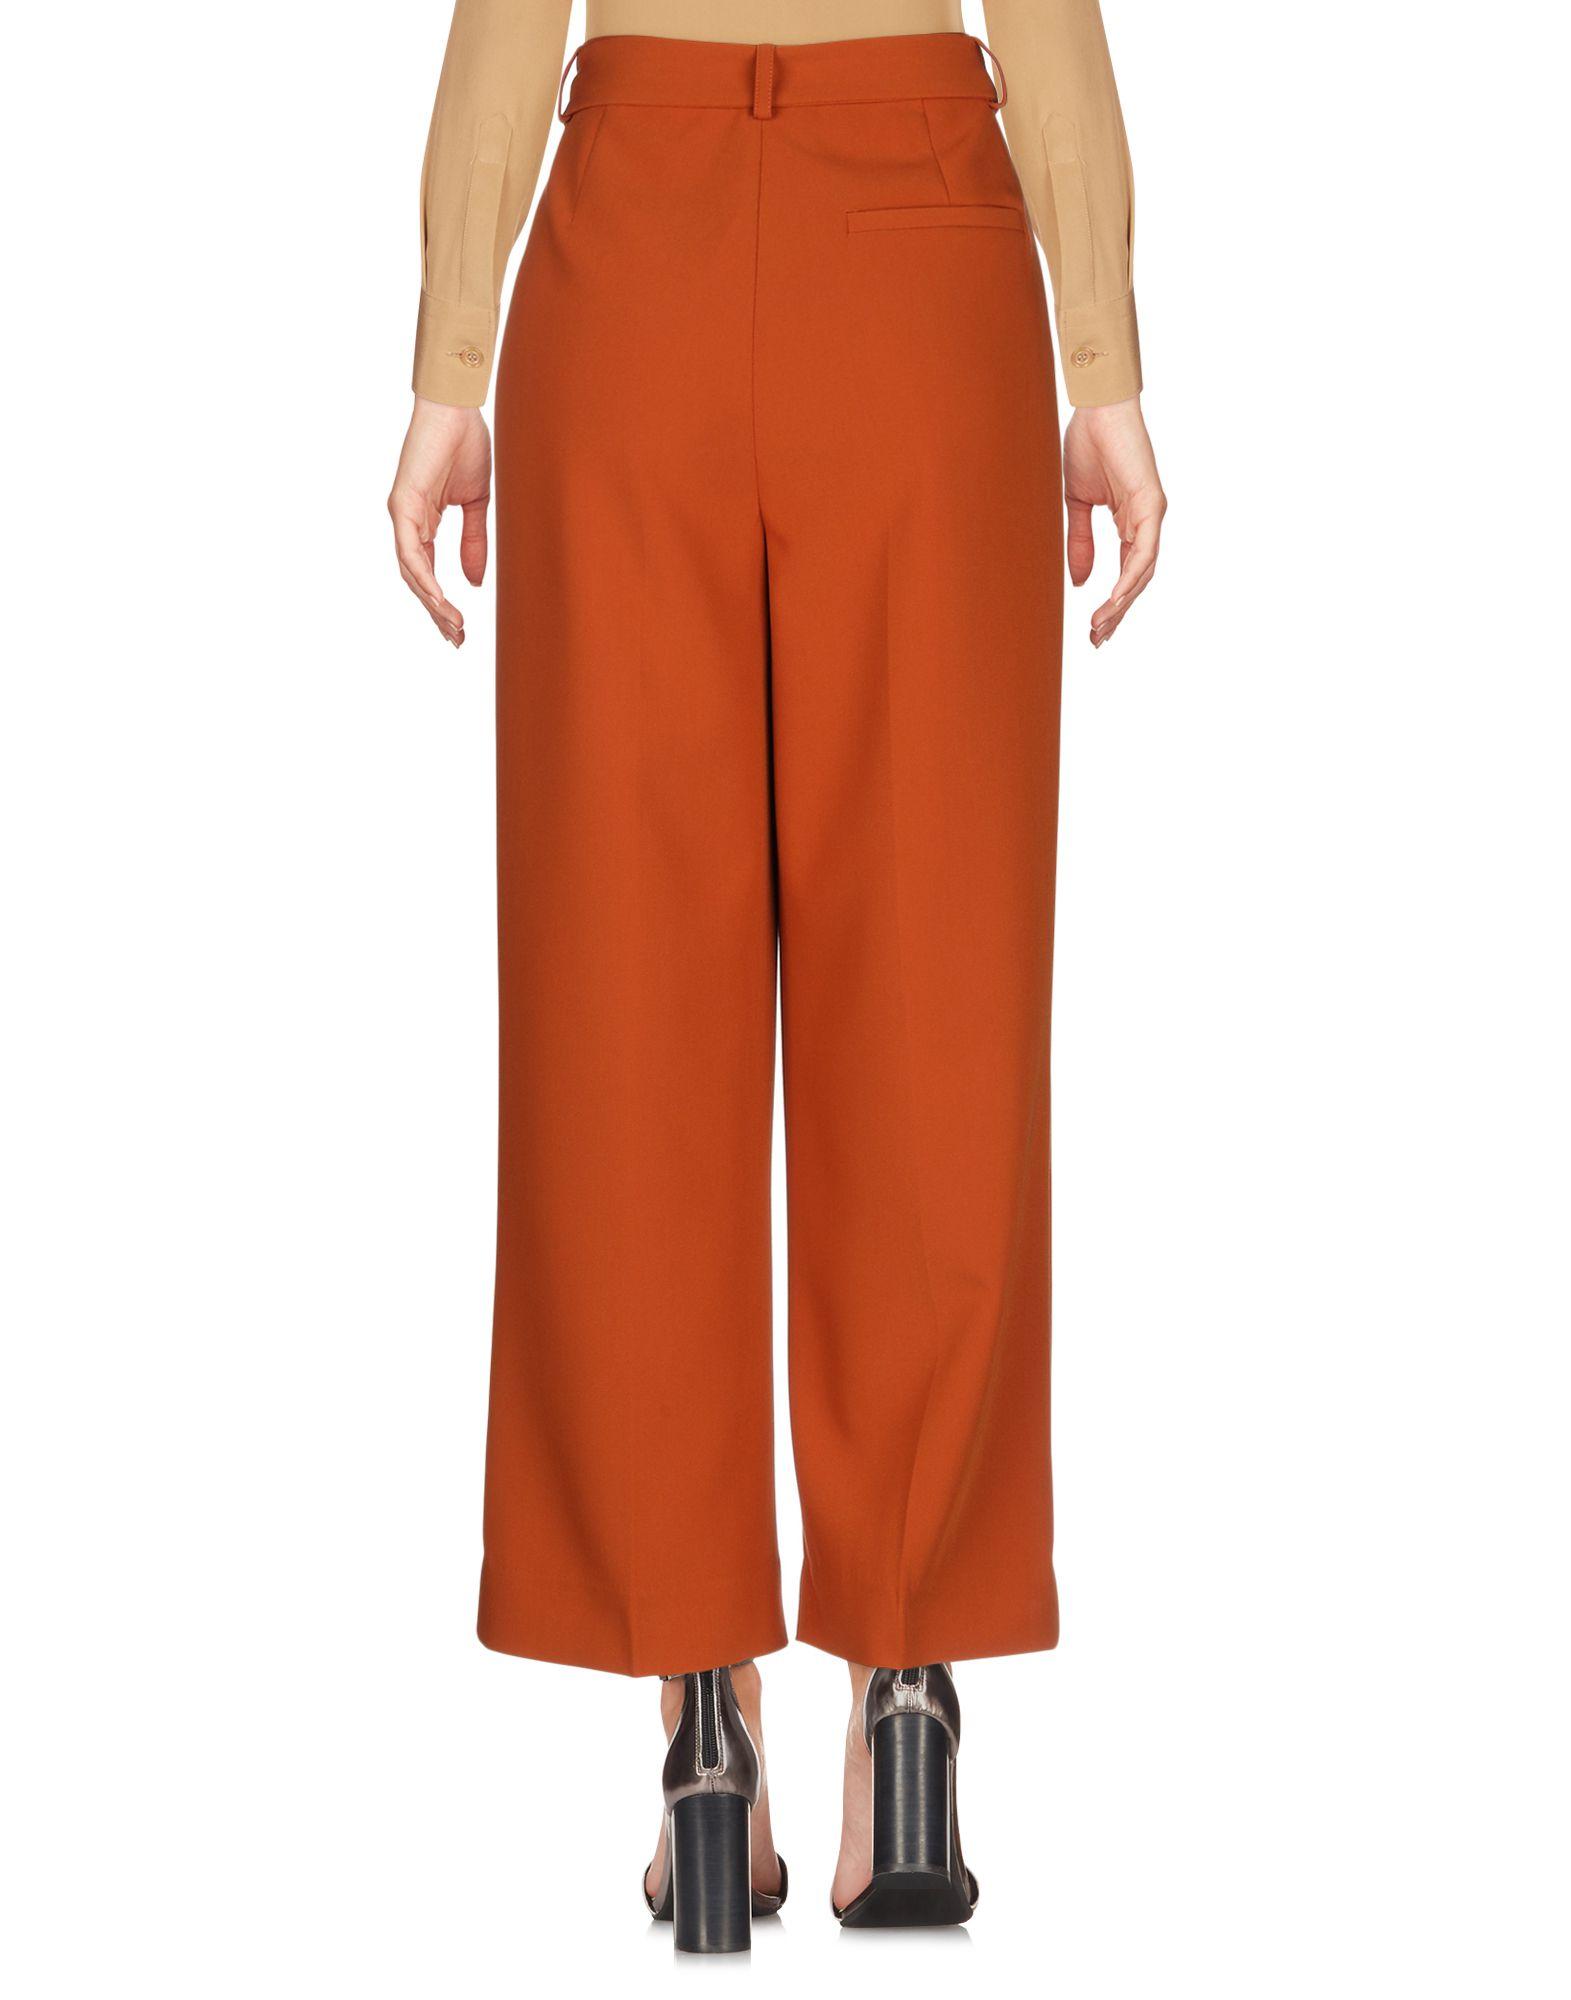 Gestuz Synthetic Casual Pants in Rust (Brown) - Lyst